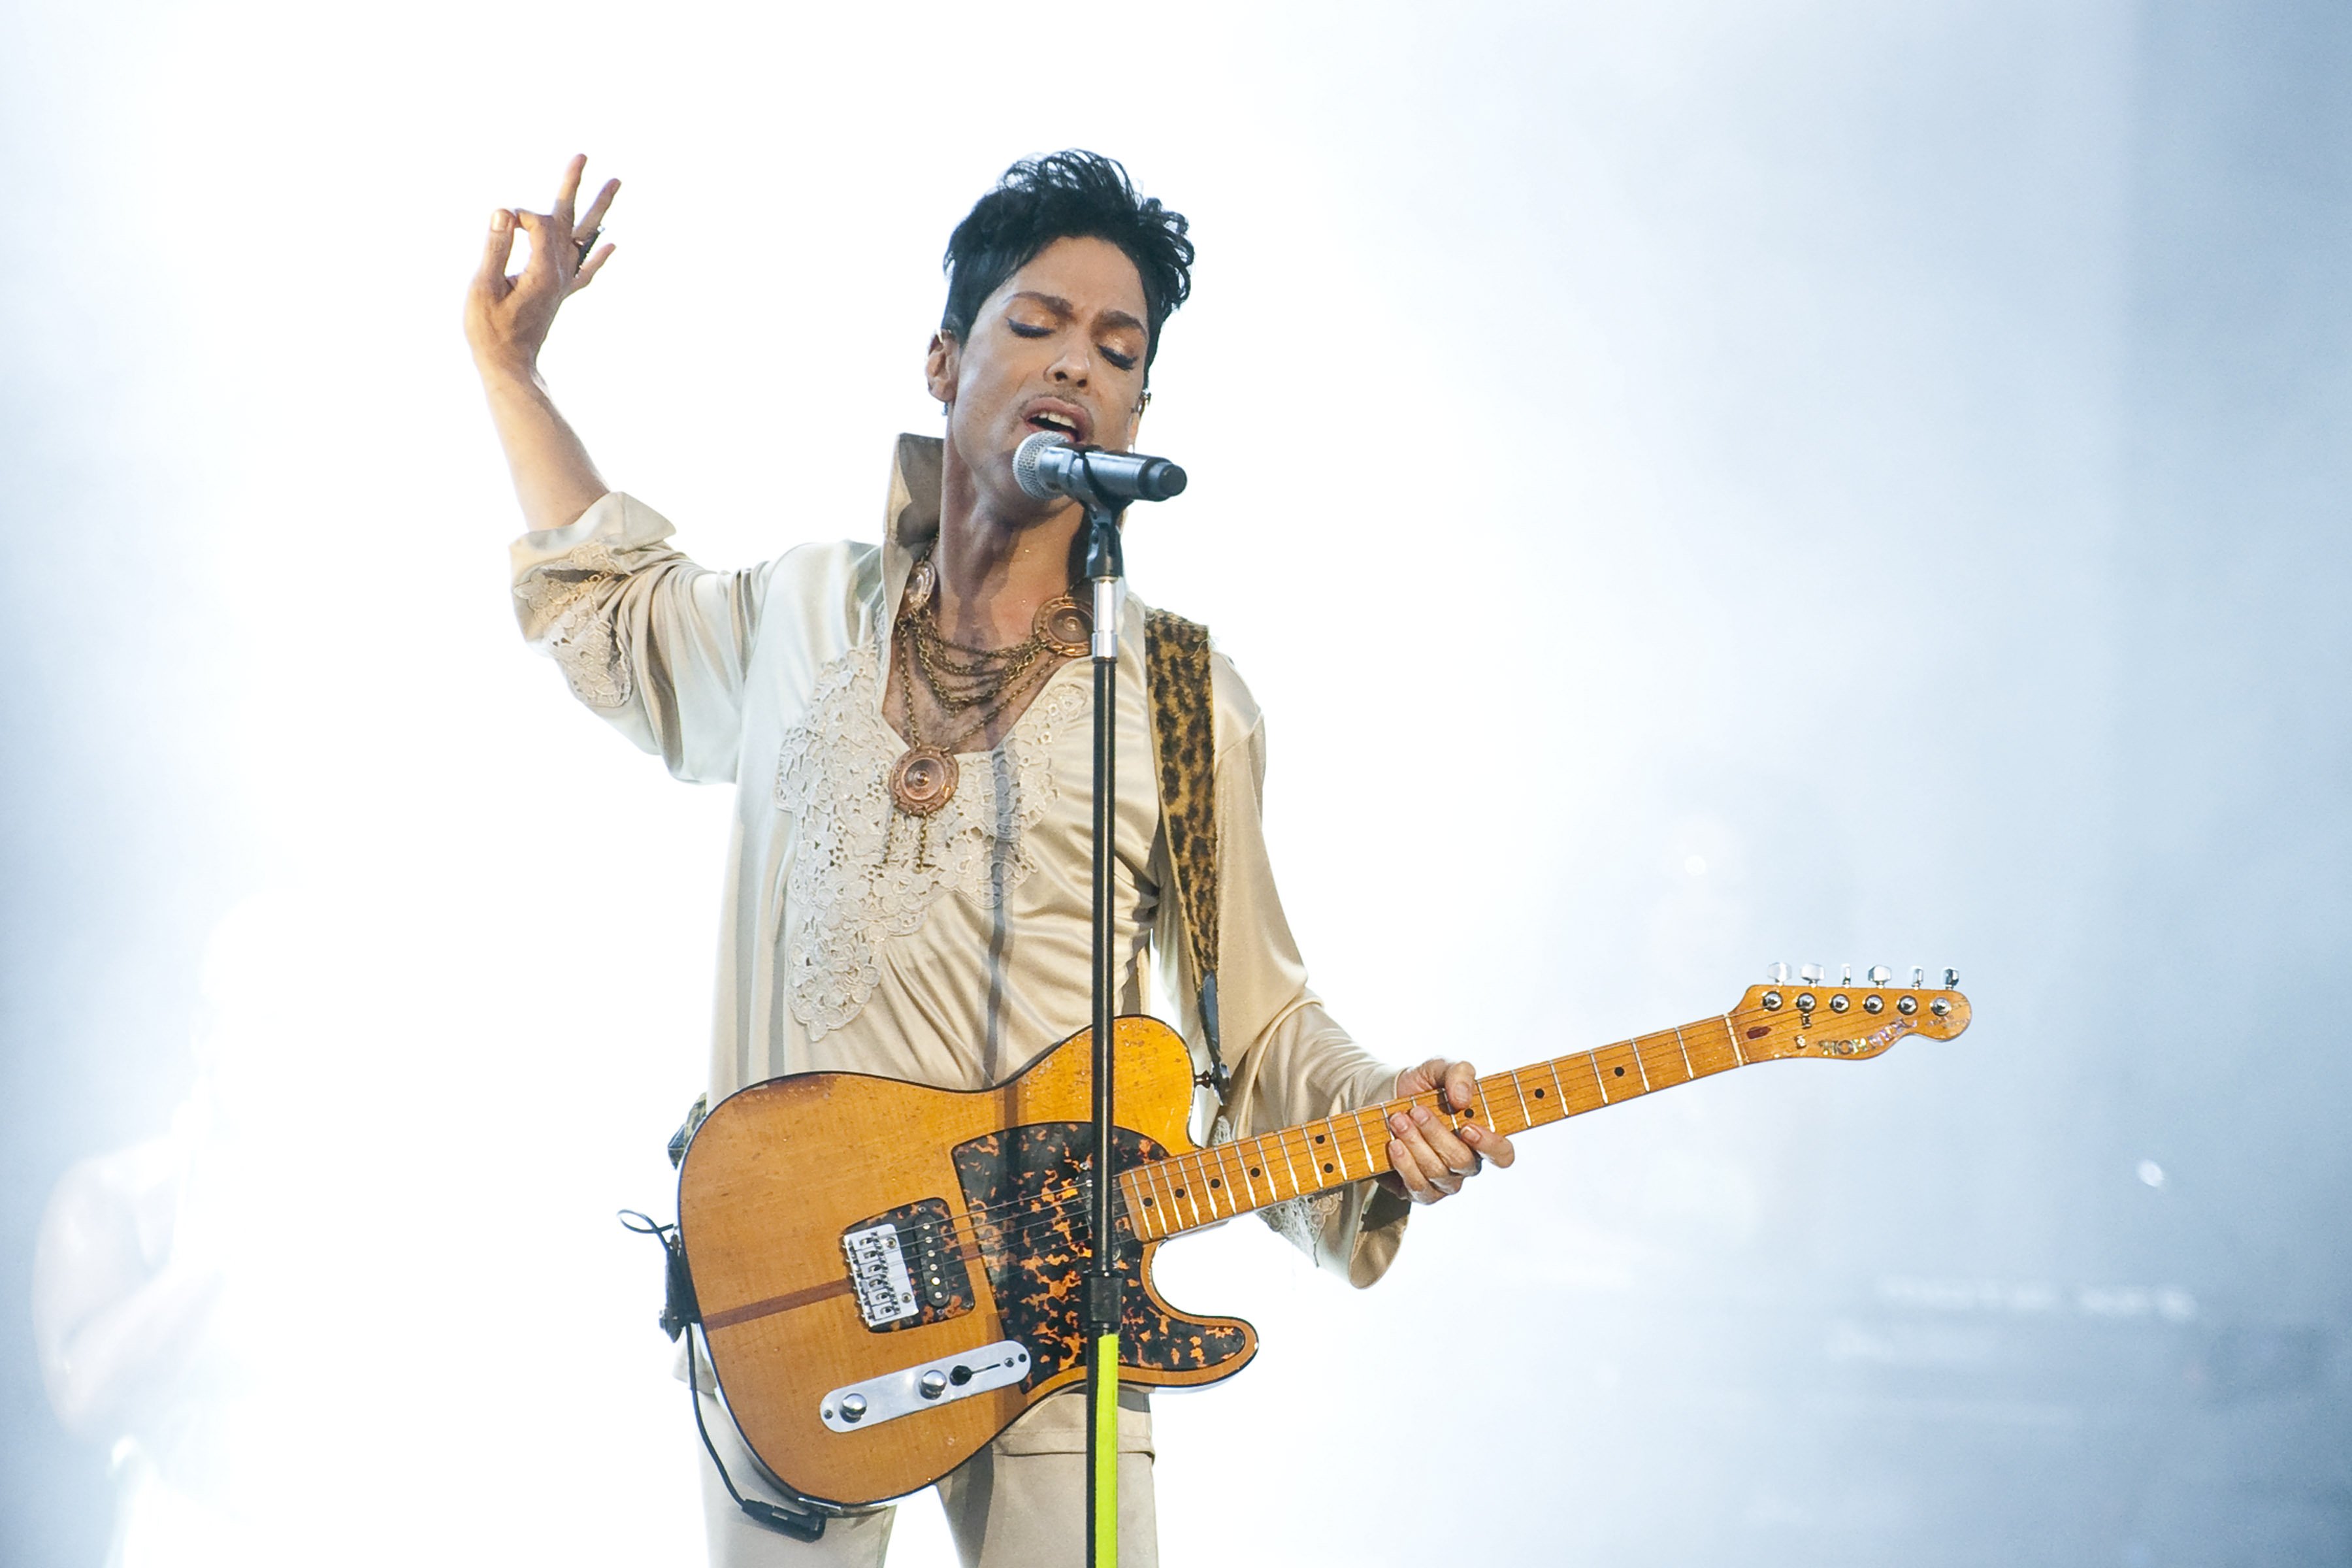 Prince headlines the main stage on the last day of Hop Farm Festival on July 3, 2011 in Paddock Wood, United Kingdom. | Photo: Getty Images